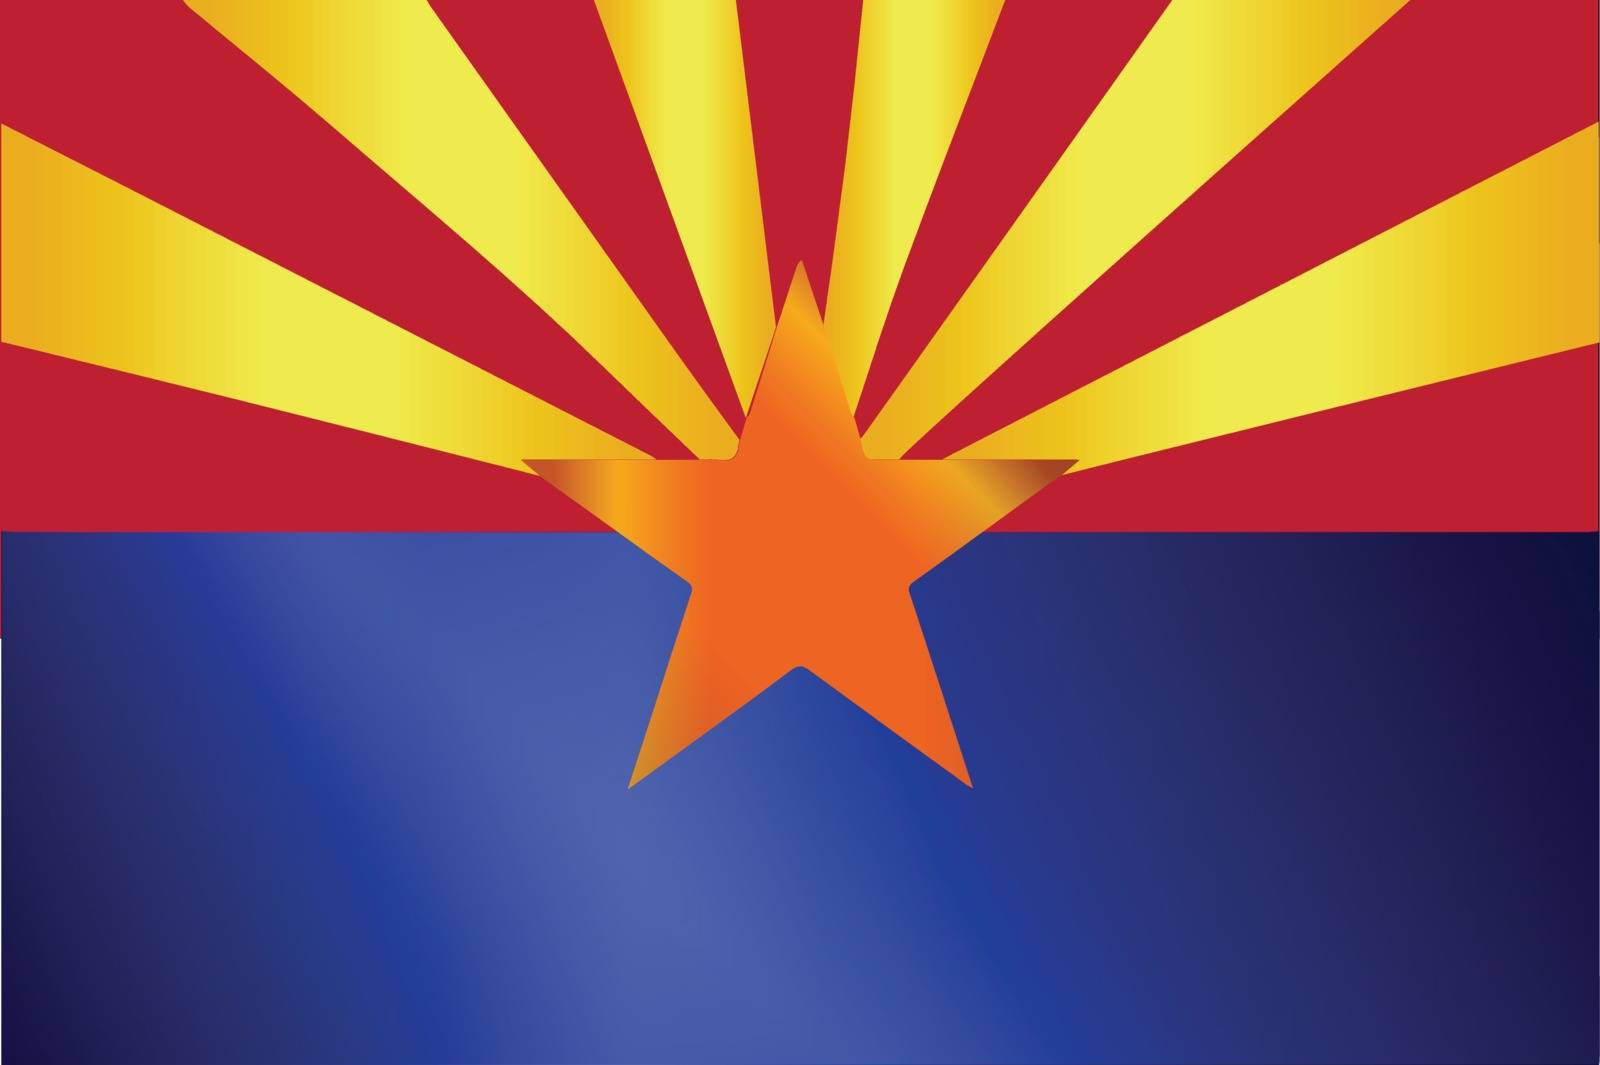 The state flag of the State of Arizona